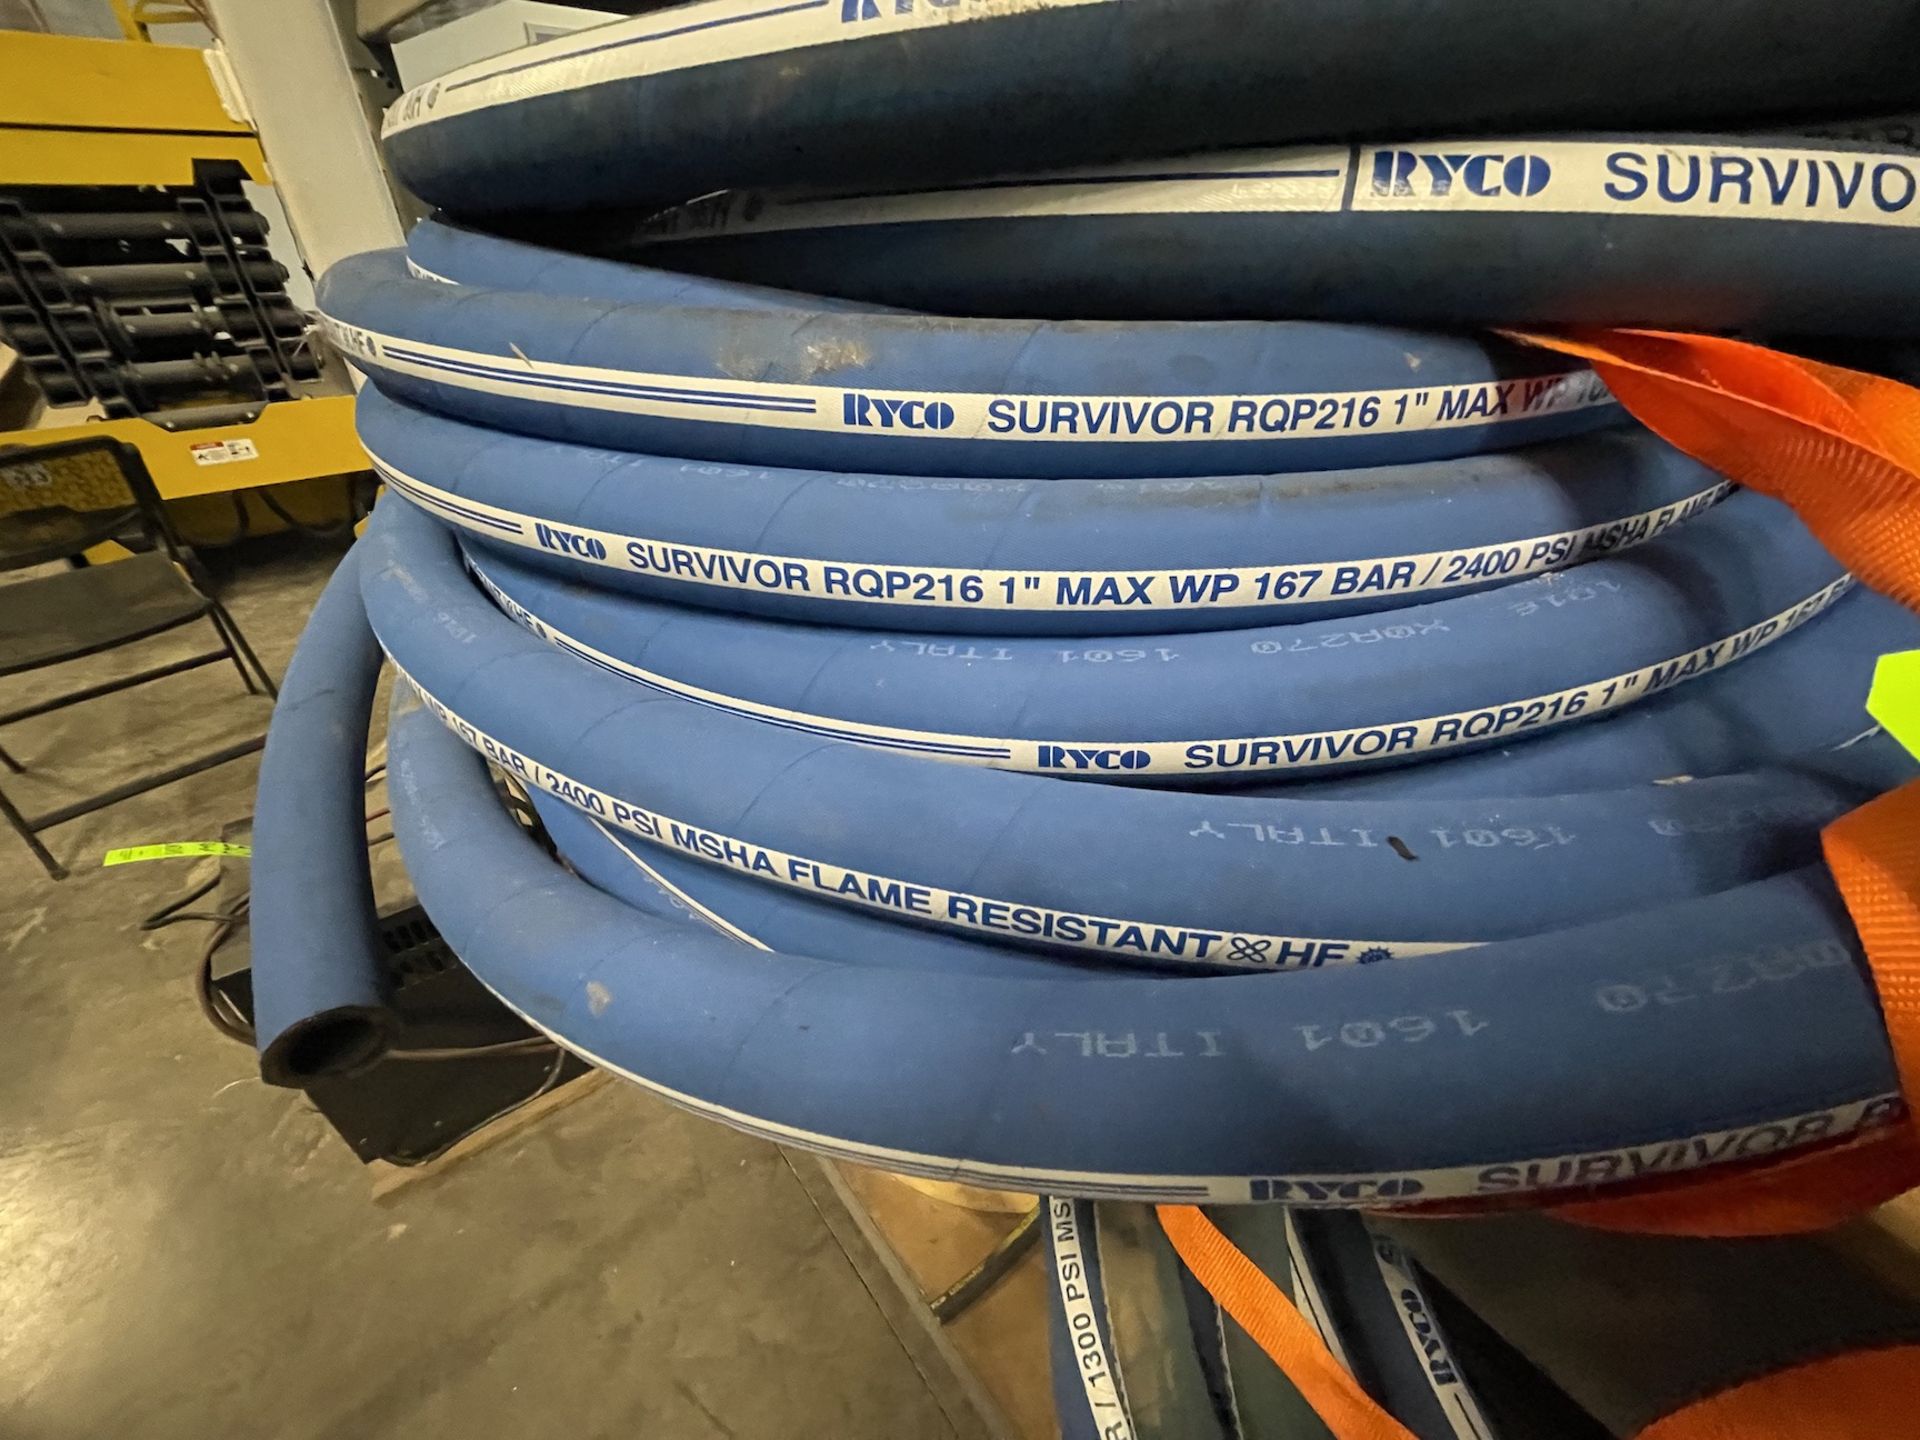 RYCO SURVIVOR RQP116 HYDRAULIC HOSE 2400psi (ALL PURCHASES MUST BE PAID FOR AND REMOVED BY 5/4/ - Image 2 of 3